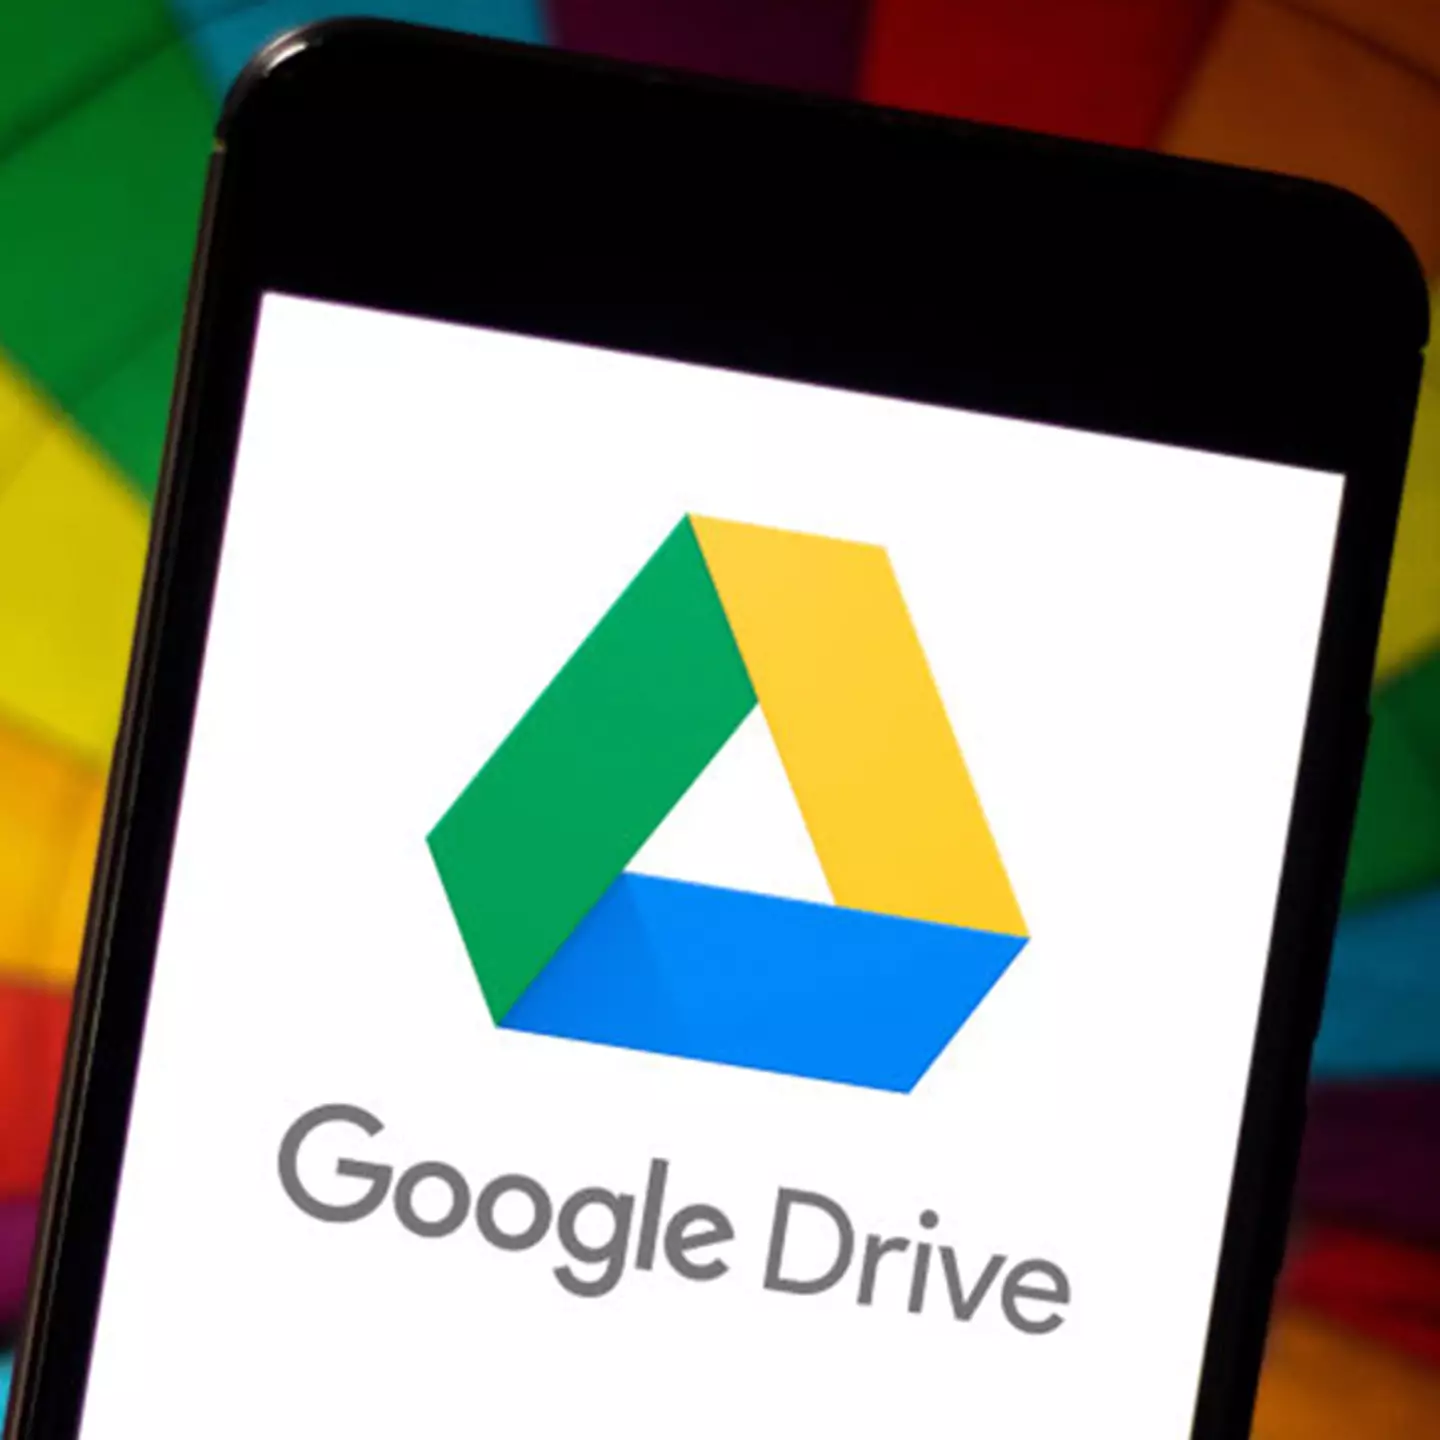 Google issue warning to Drive users after many reported missing months of files